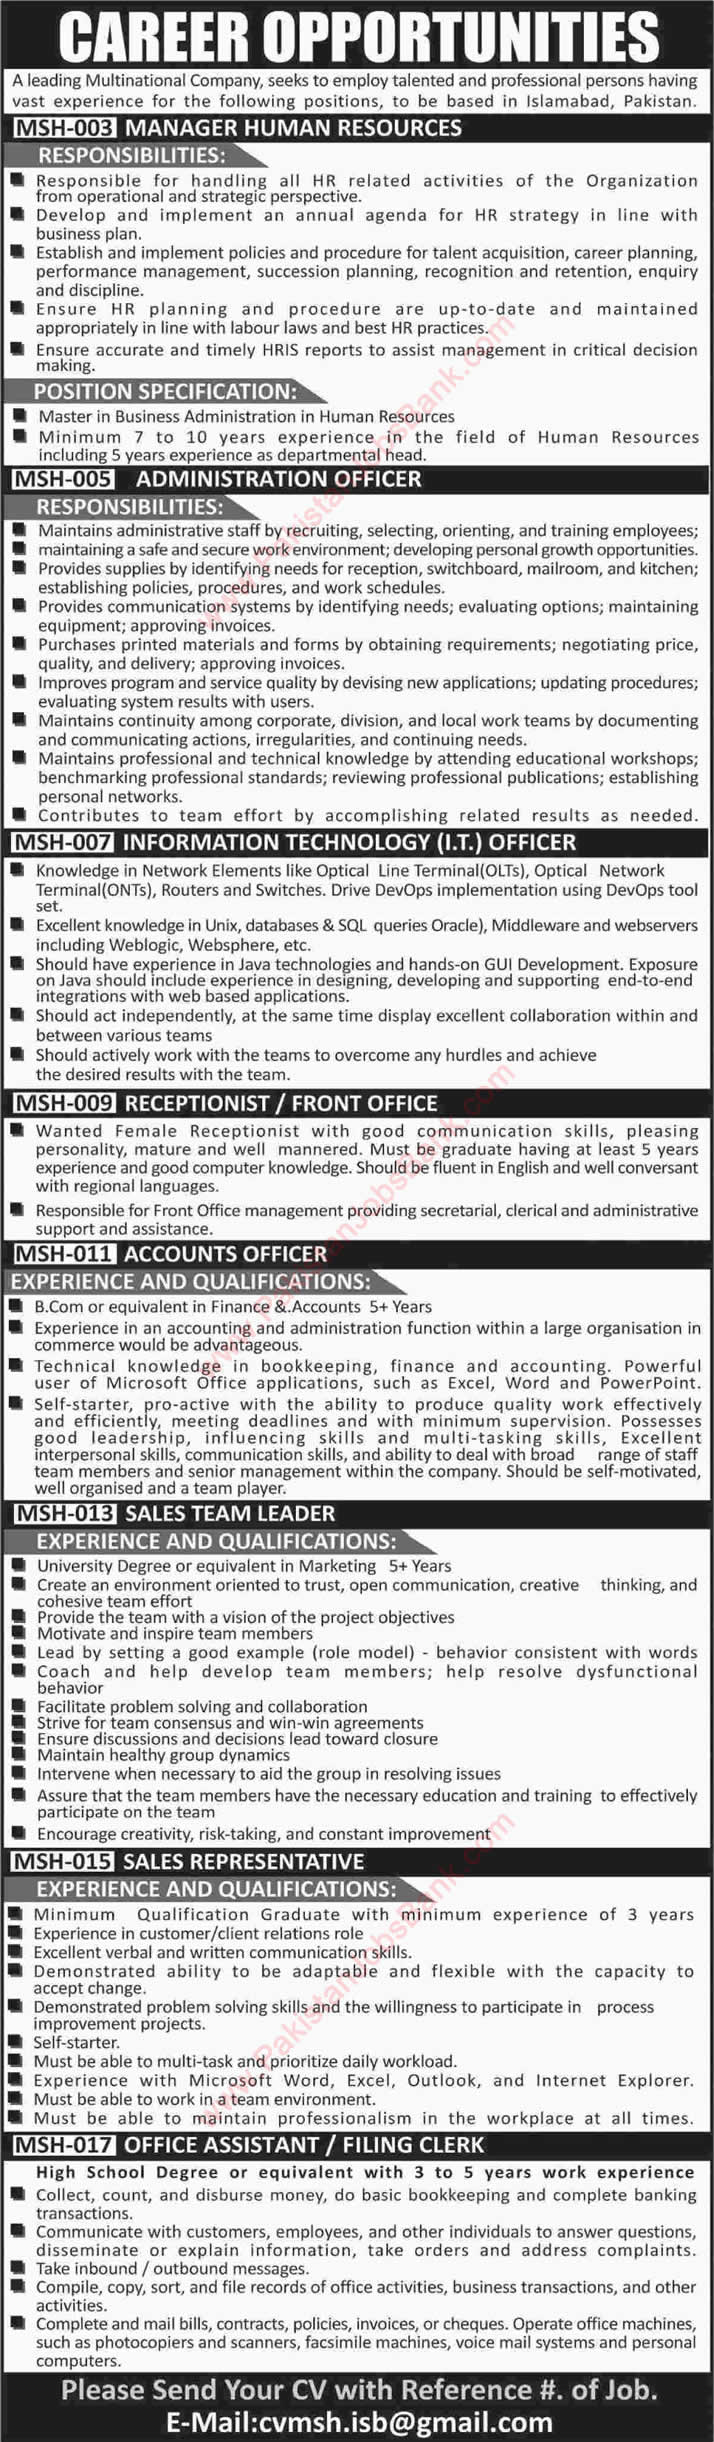 Multinational Companies Jobs in Islamabad 2015 September HR / Admin / Sales / Accounts Officers & Others